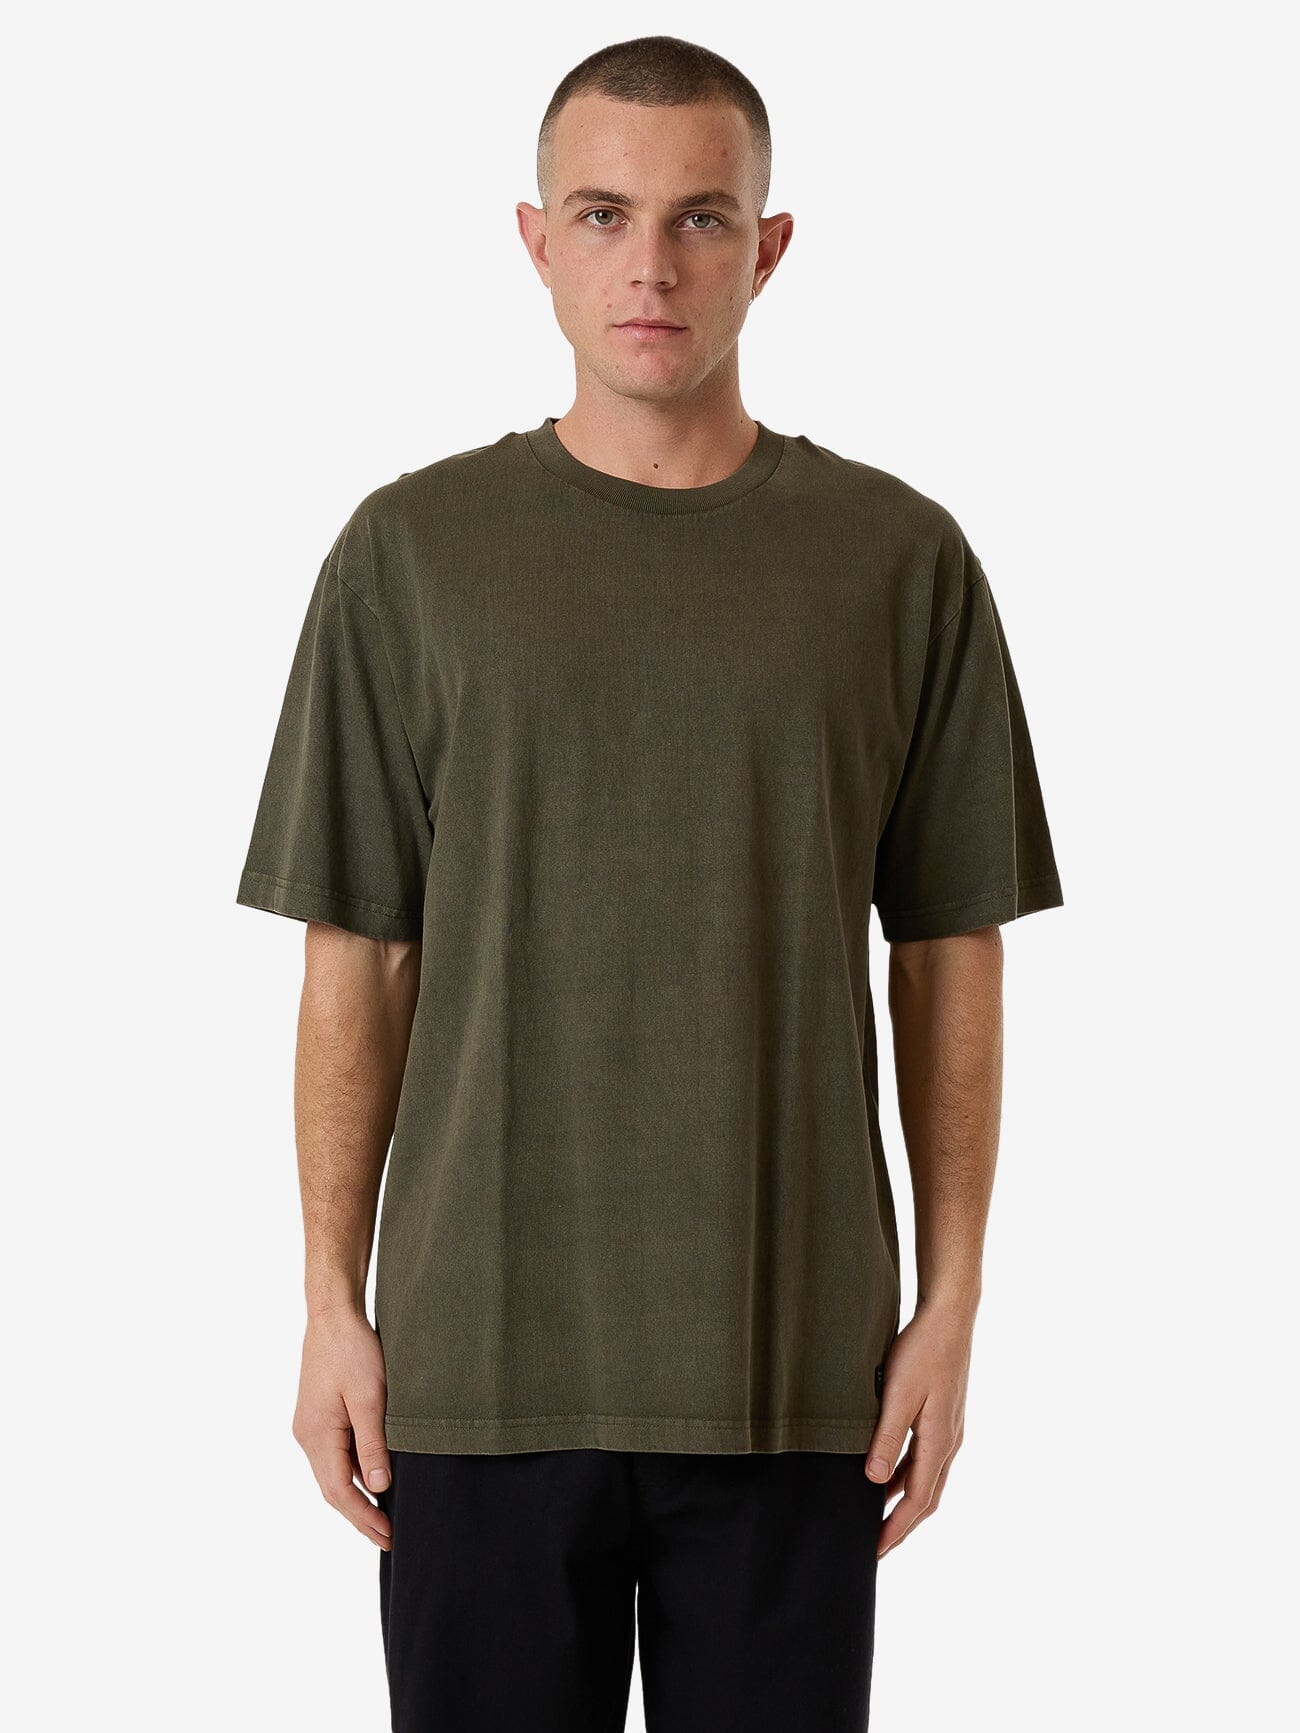 Thrills Military Oversize Fit Tee - Grape Leaf